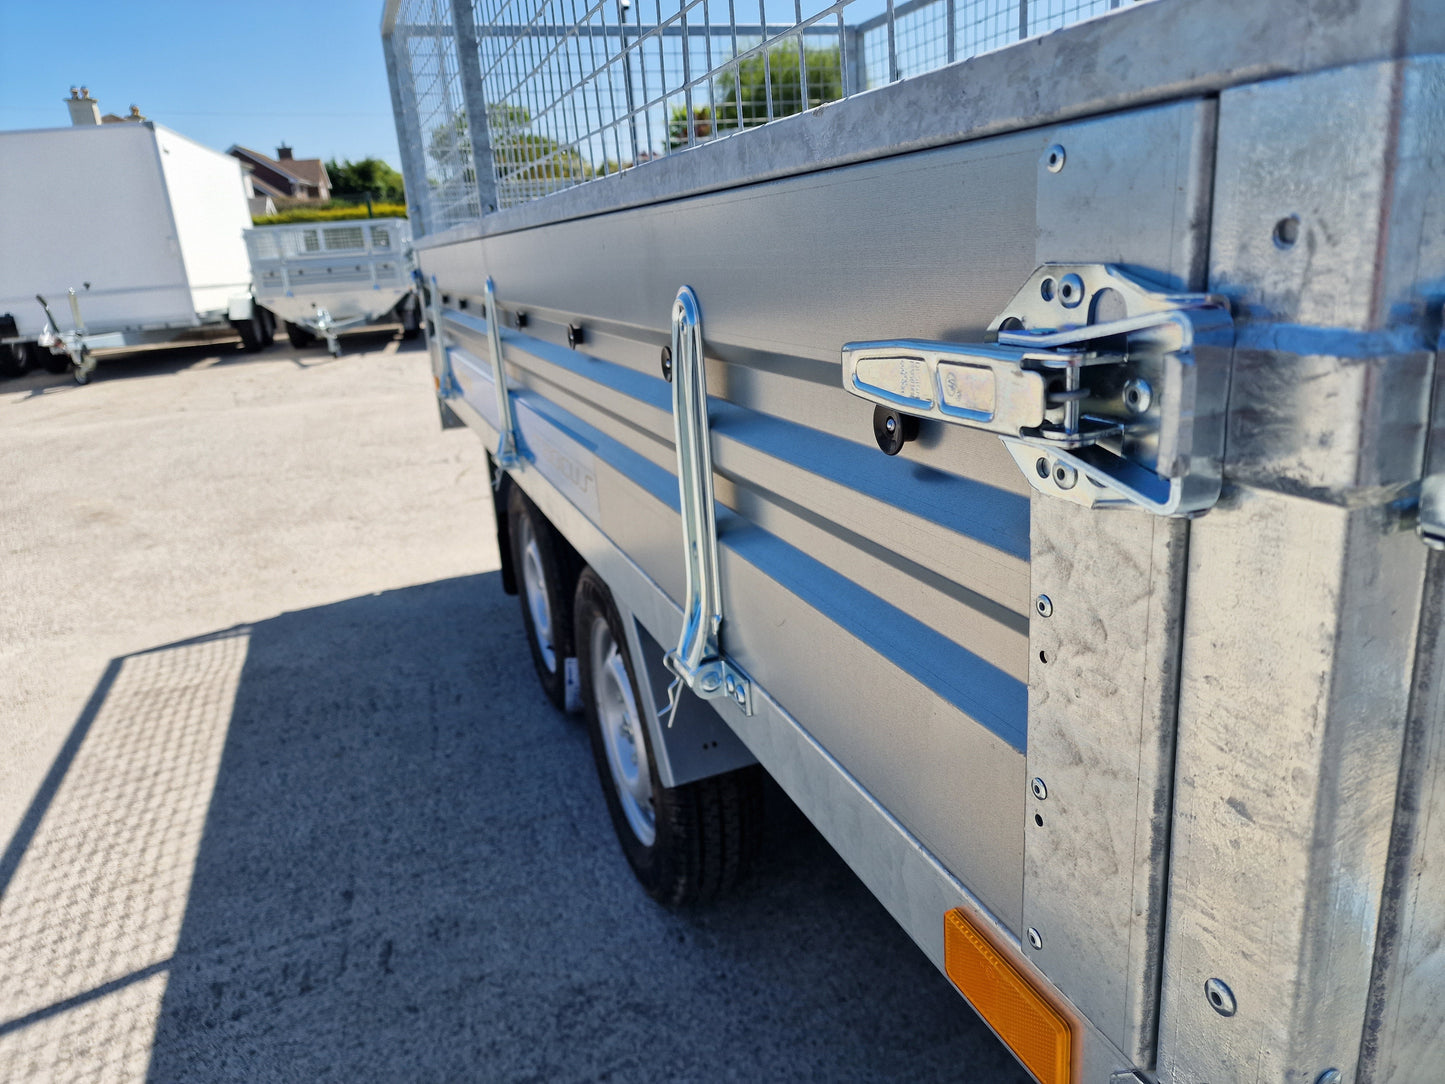 10 x 5 Twin Axle Dropside Trailer with Mesh